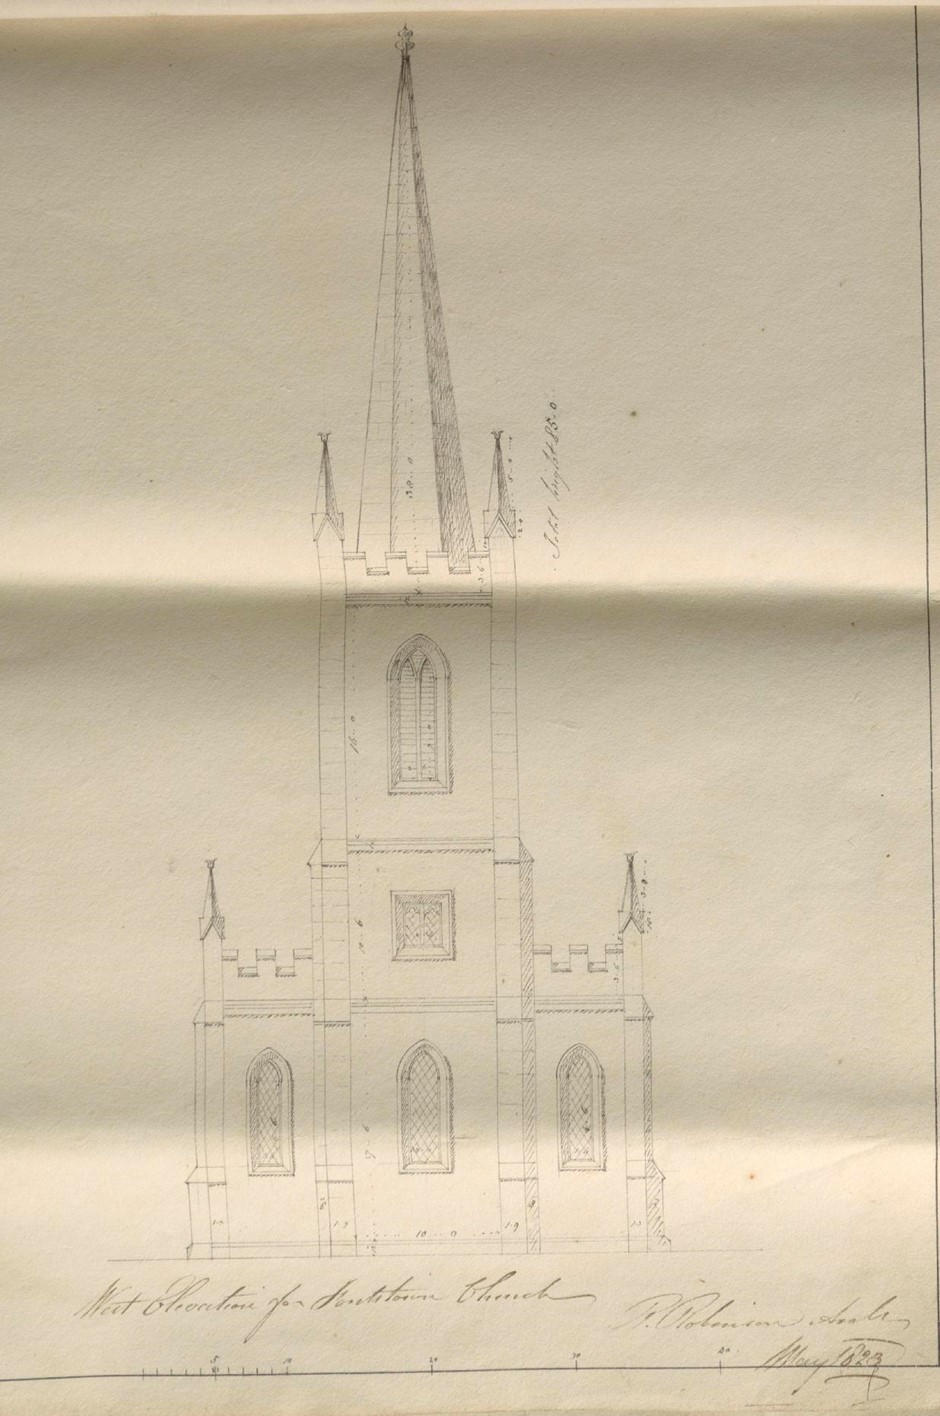 Richard Robinson, “West Elevation for Fontstown Church. R Robinson Architect. May 1823 ,” RCB Library - Architectural Drawings, accessed April 4, 2023, https://archdrawing.ireland.anglican.org/items/show/9871.